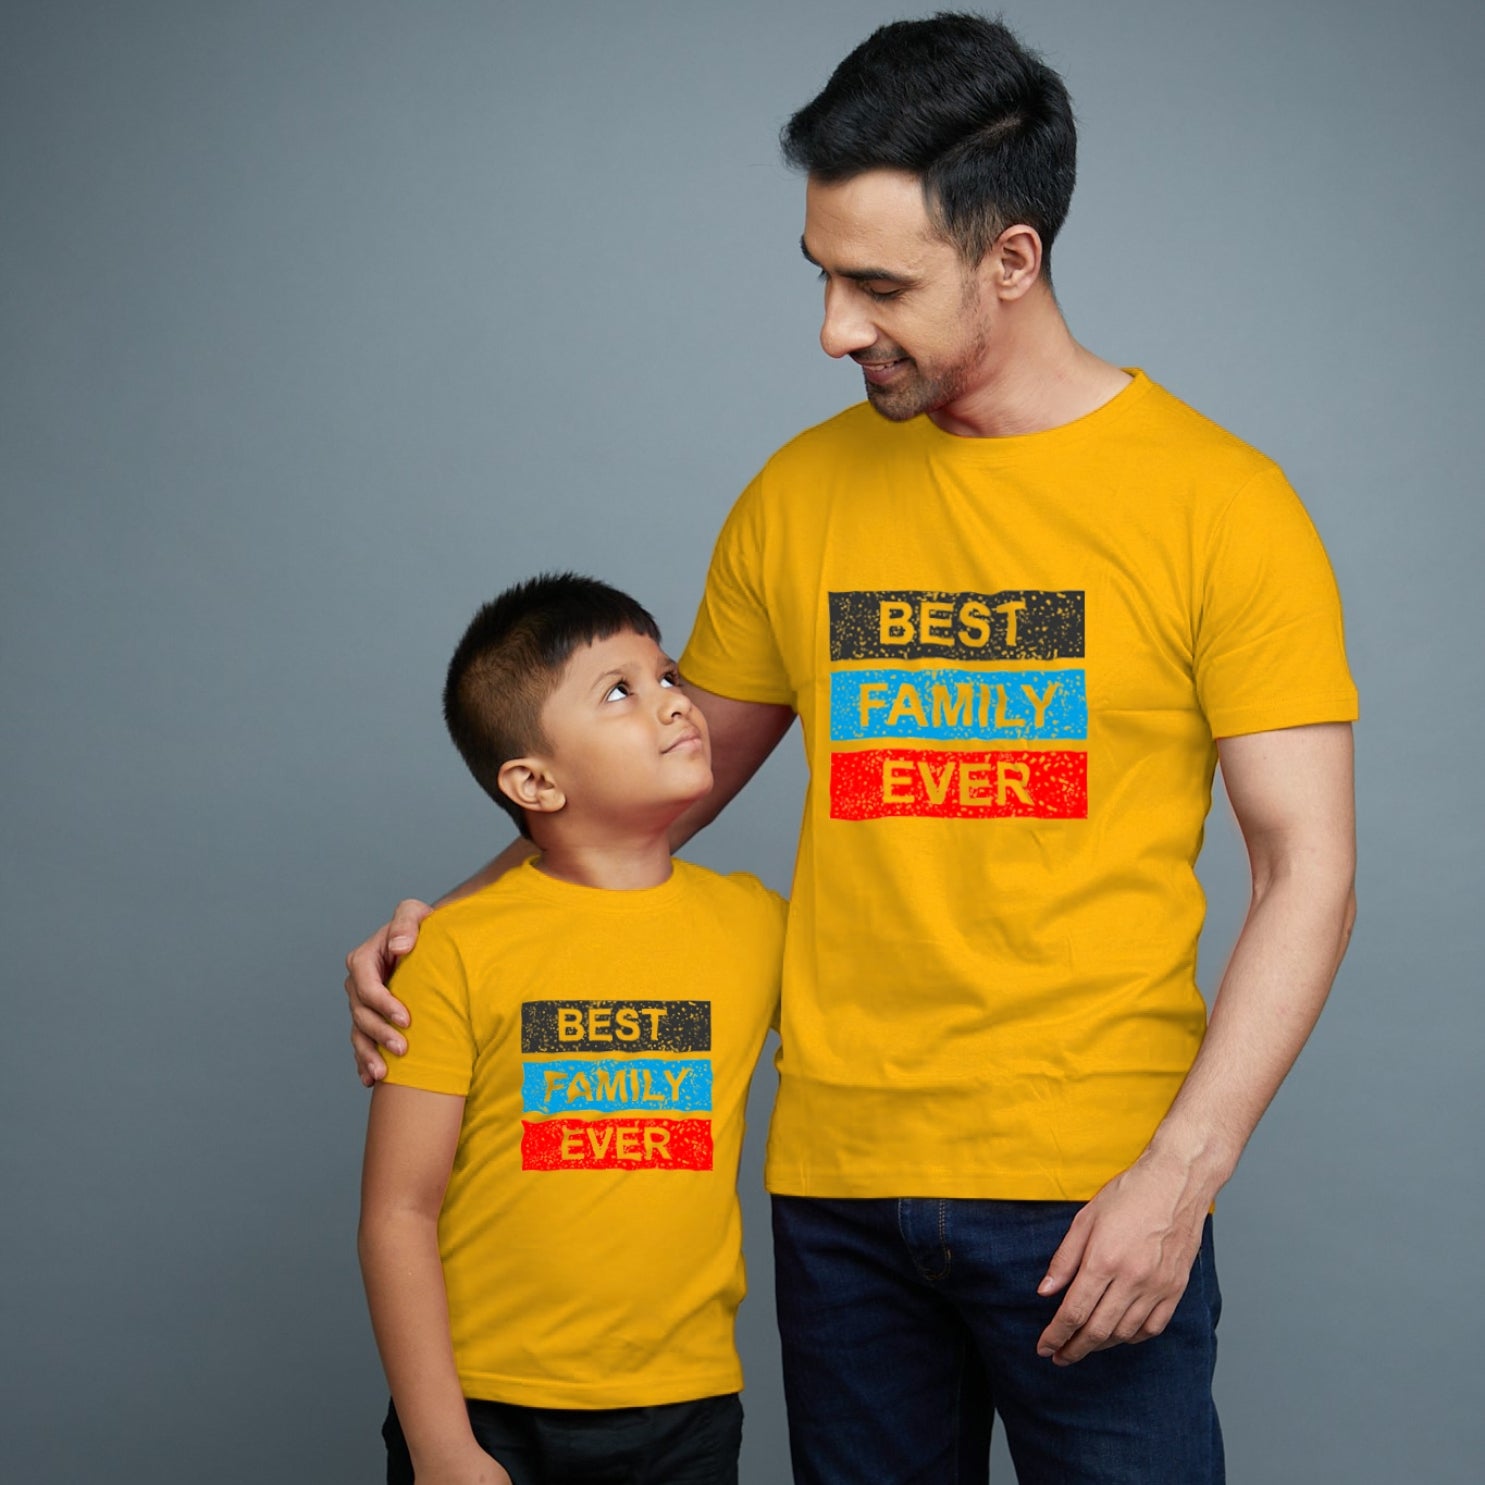 Family of 2 t shirt for Dad Son in Yellow Colour- Best Family Ever